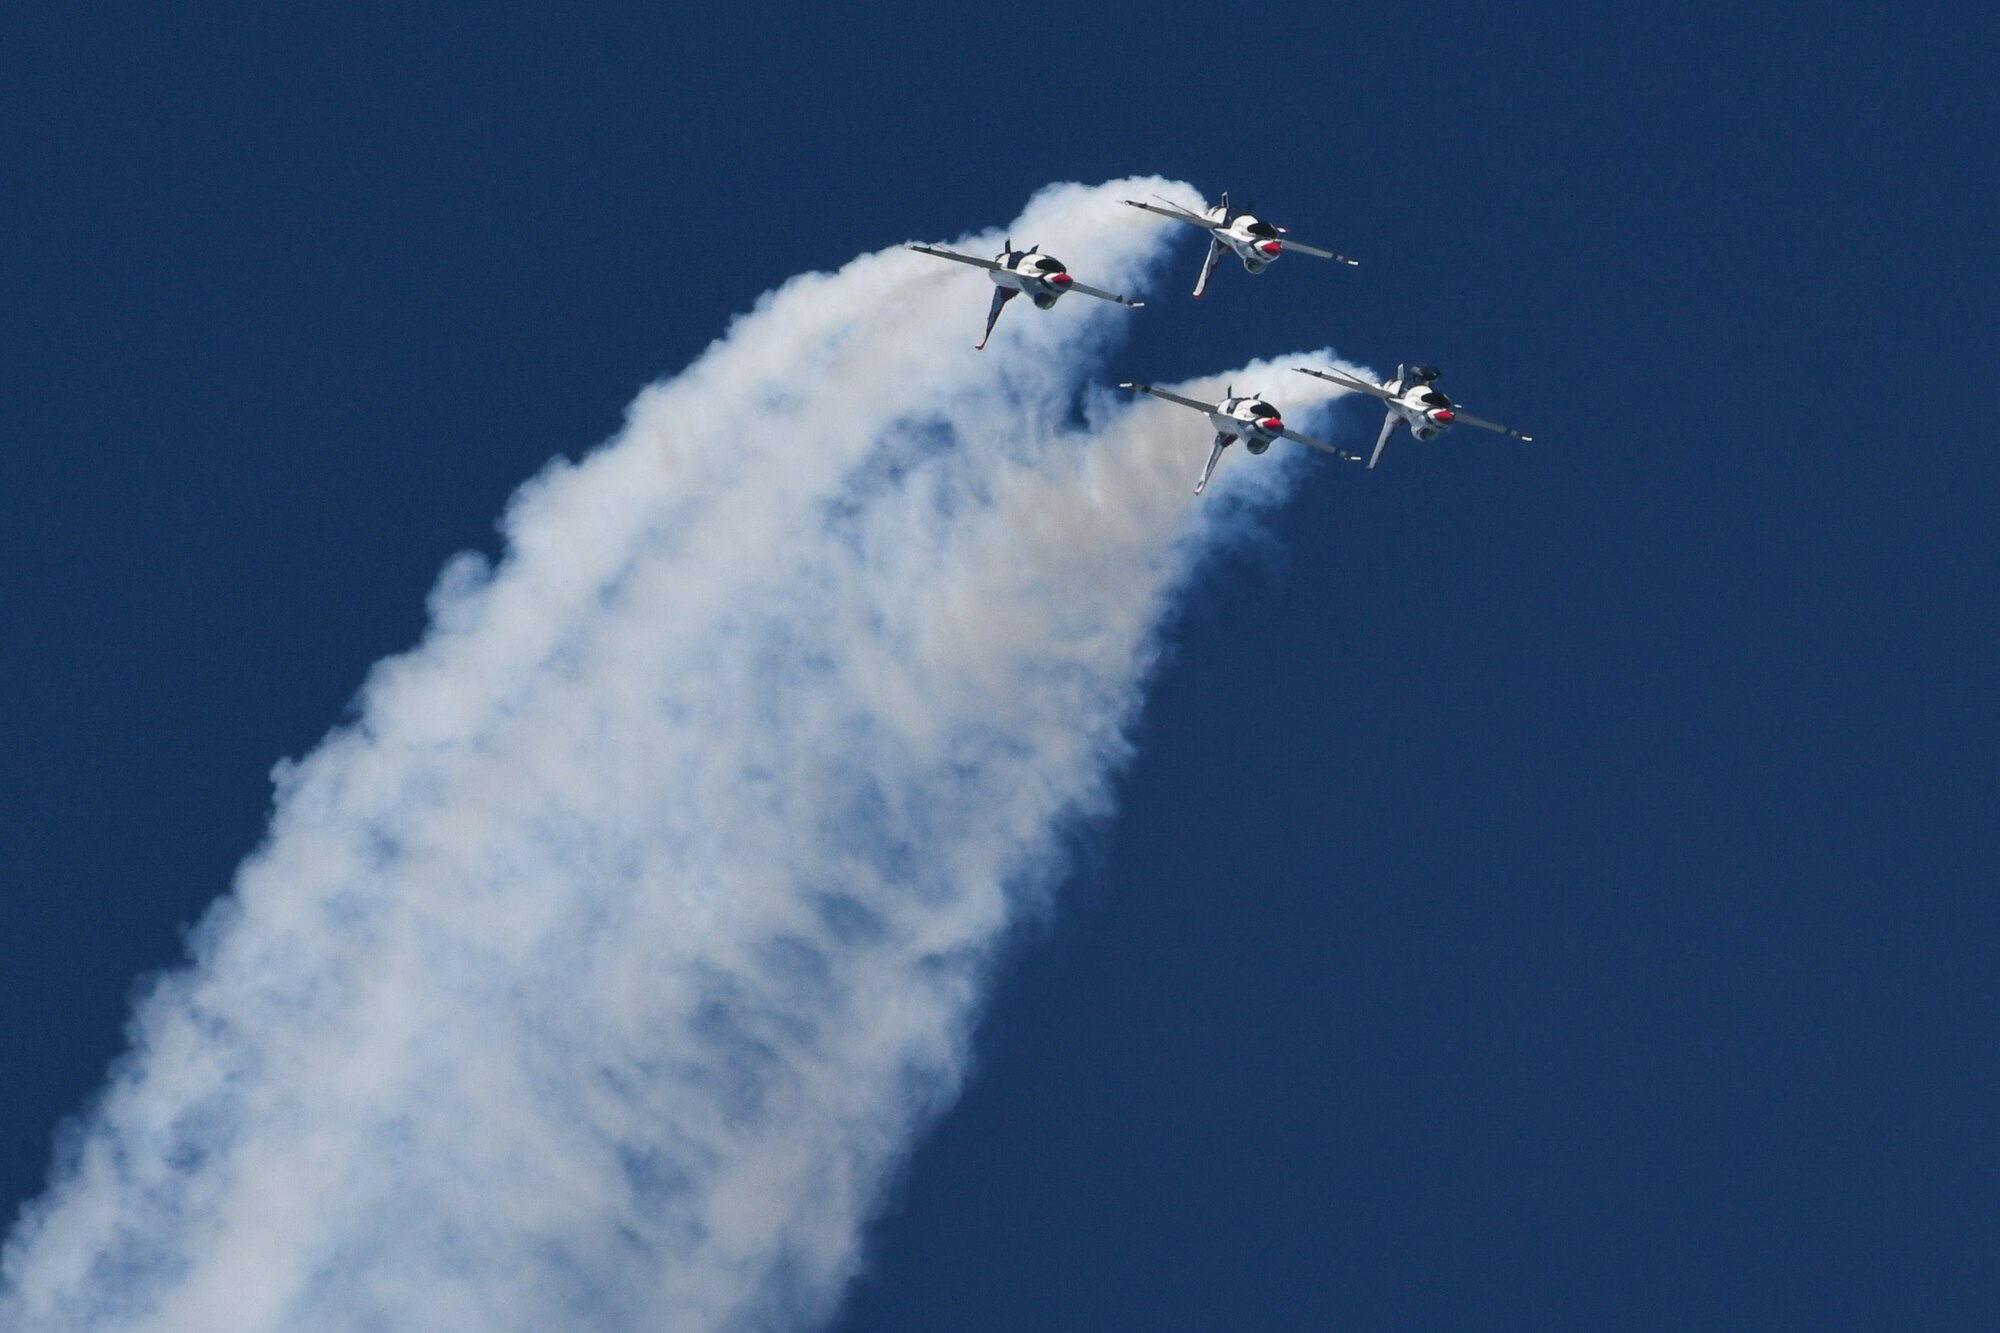 Thunderbirds practicing for Thunder Over The Rock Airshow